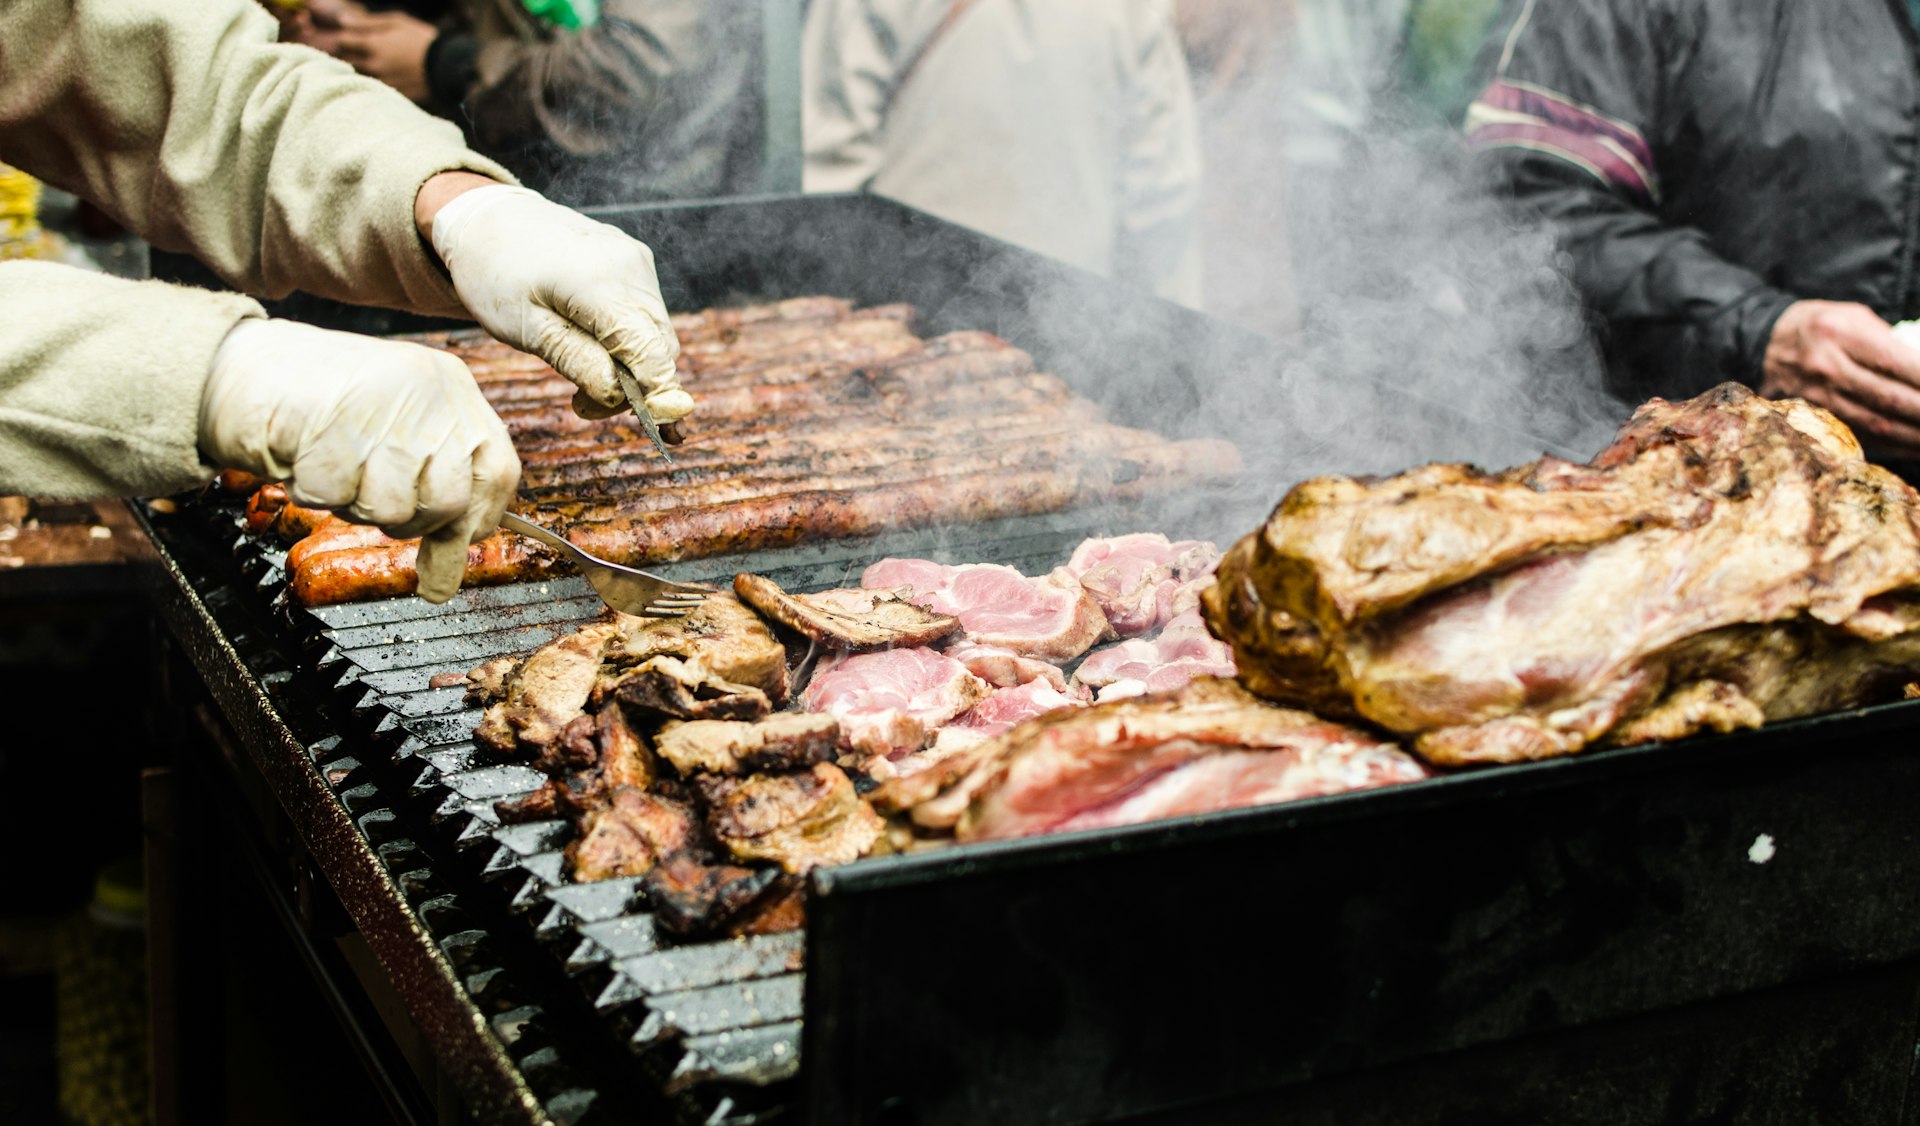 A chef wearing gloves is using tools to turn over a selection of meats on a barbecue grill.